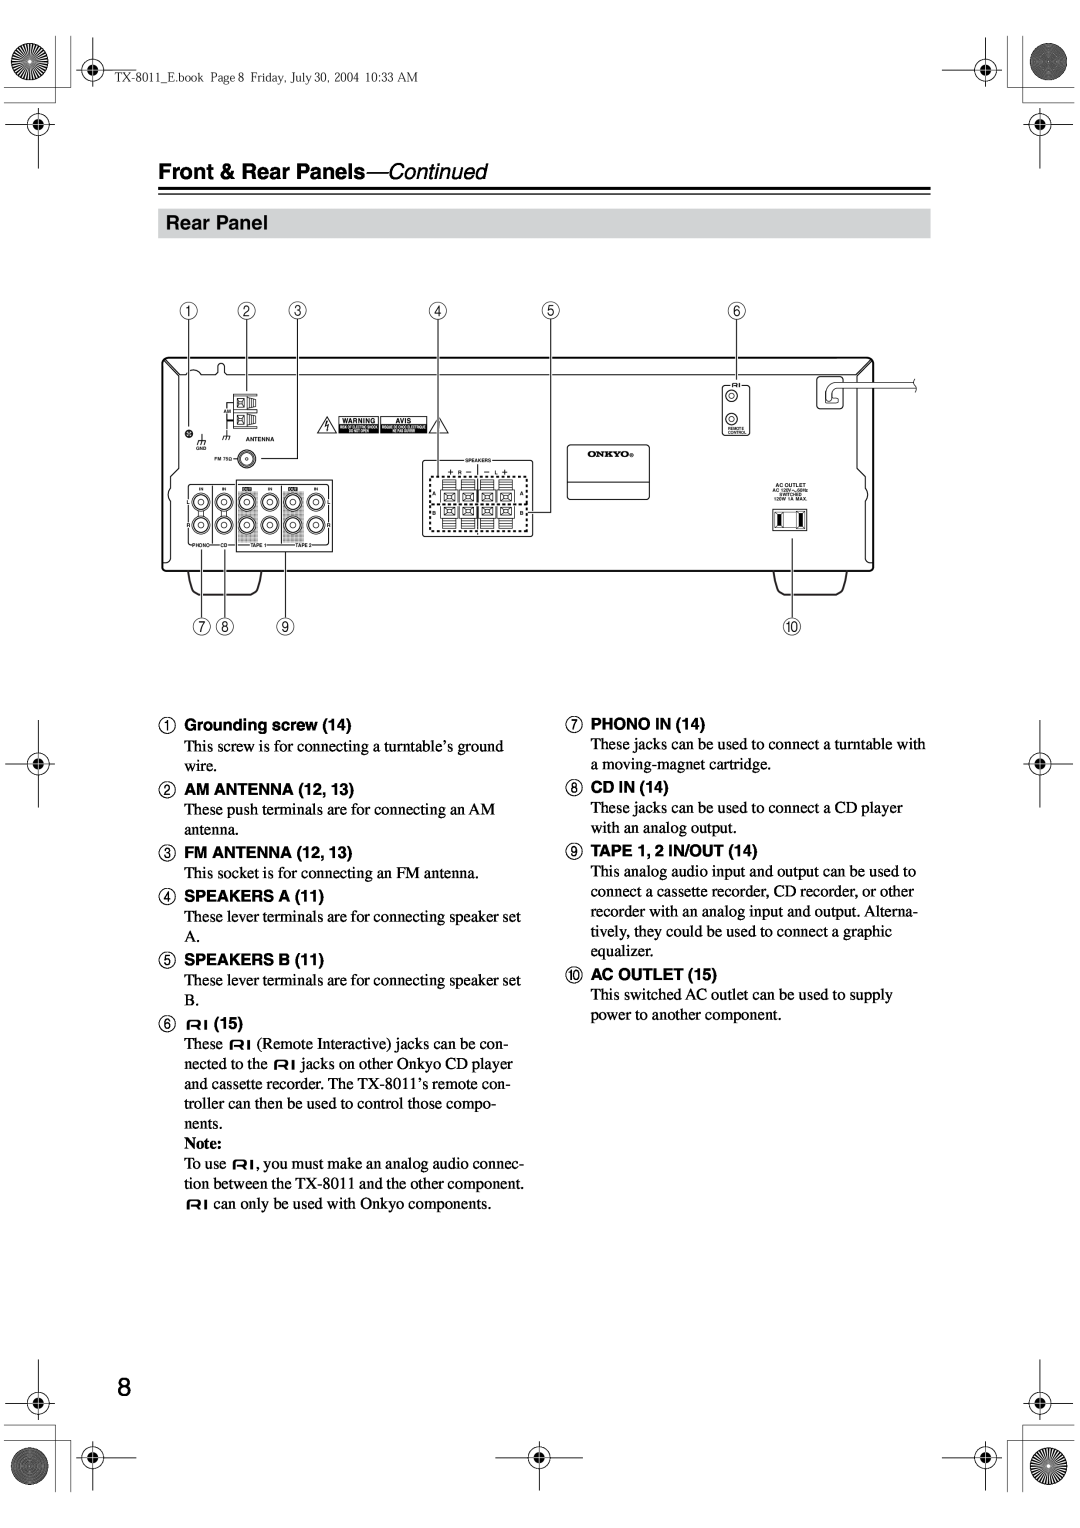 Onkyo TX-8011 instruction manual Front & Rear Panels-Continued 